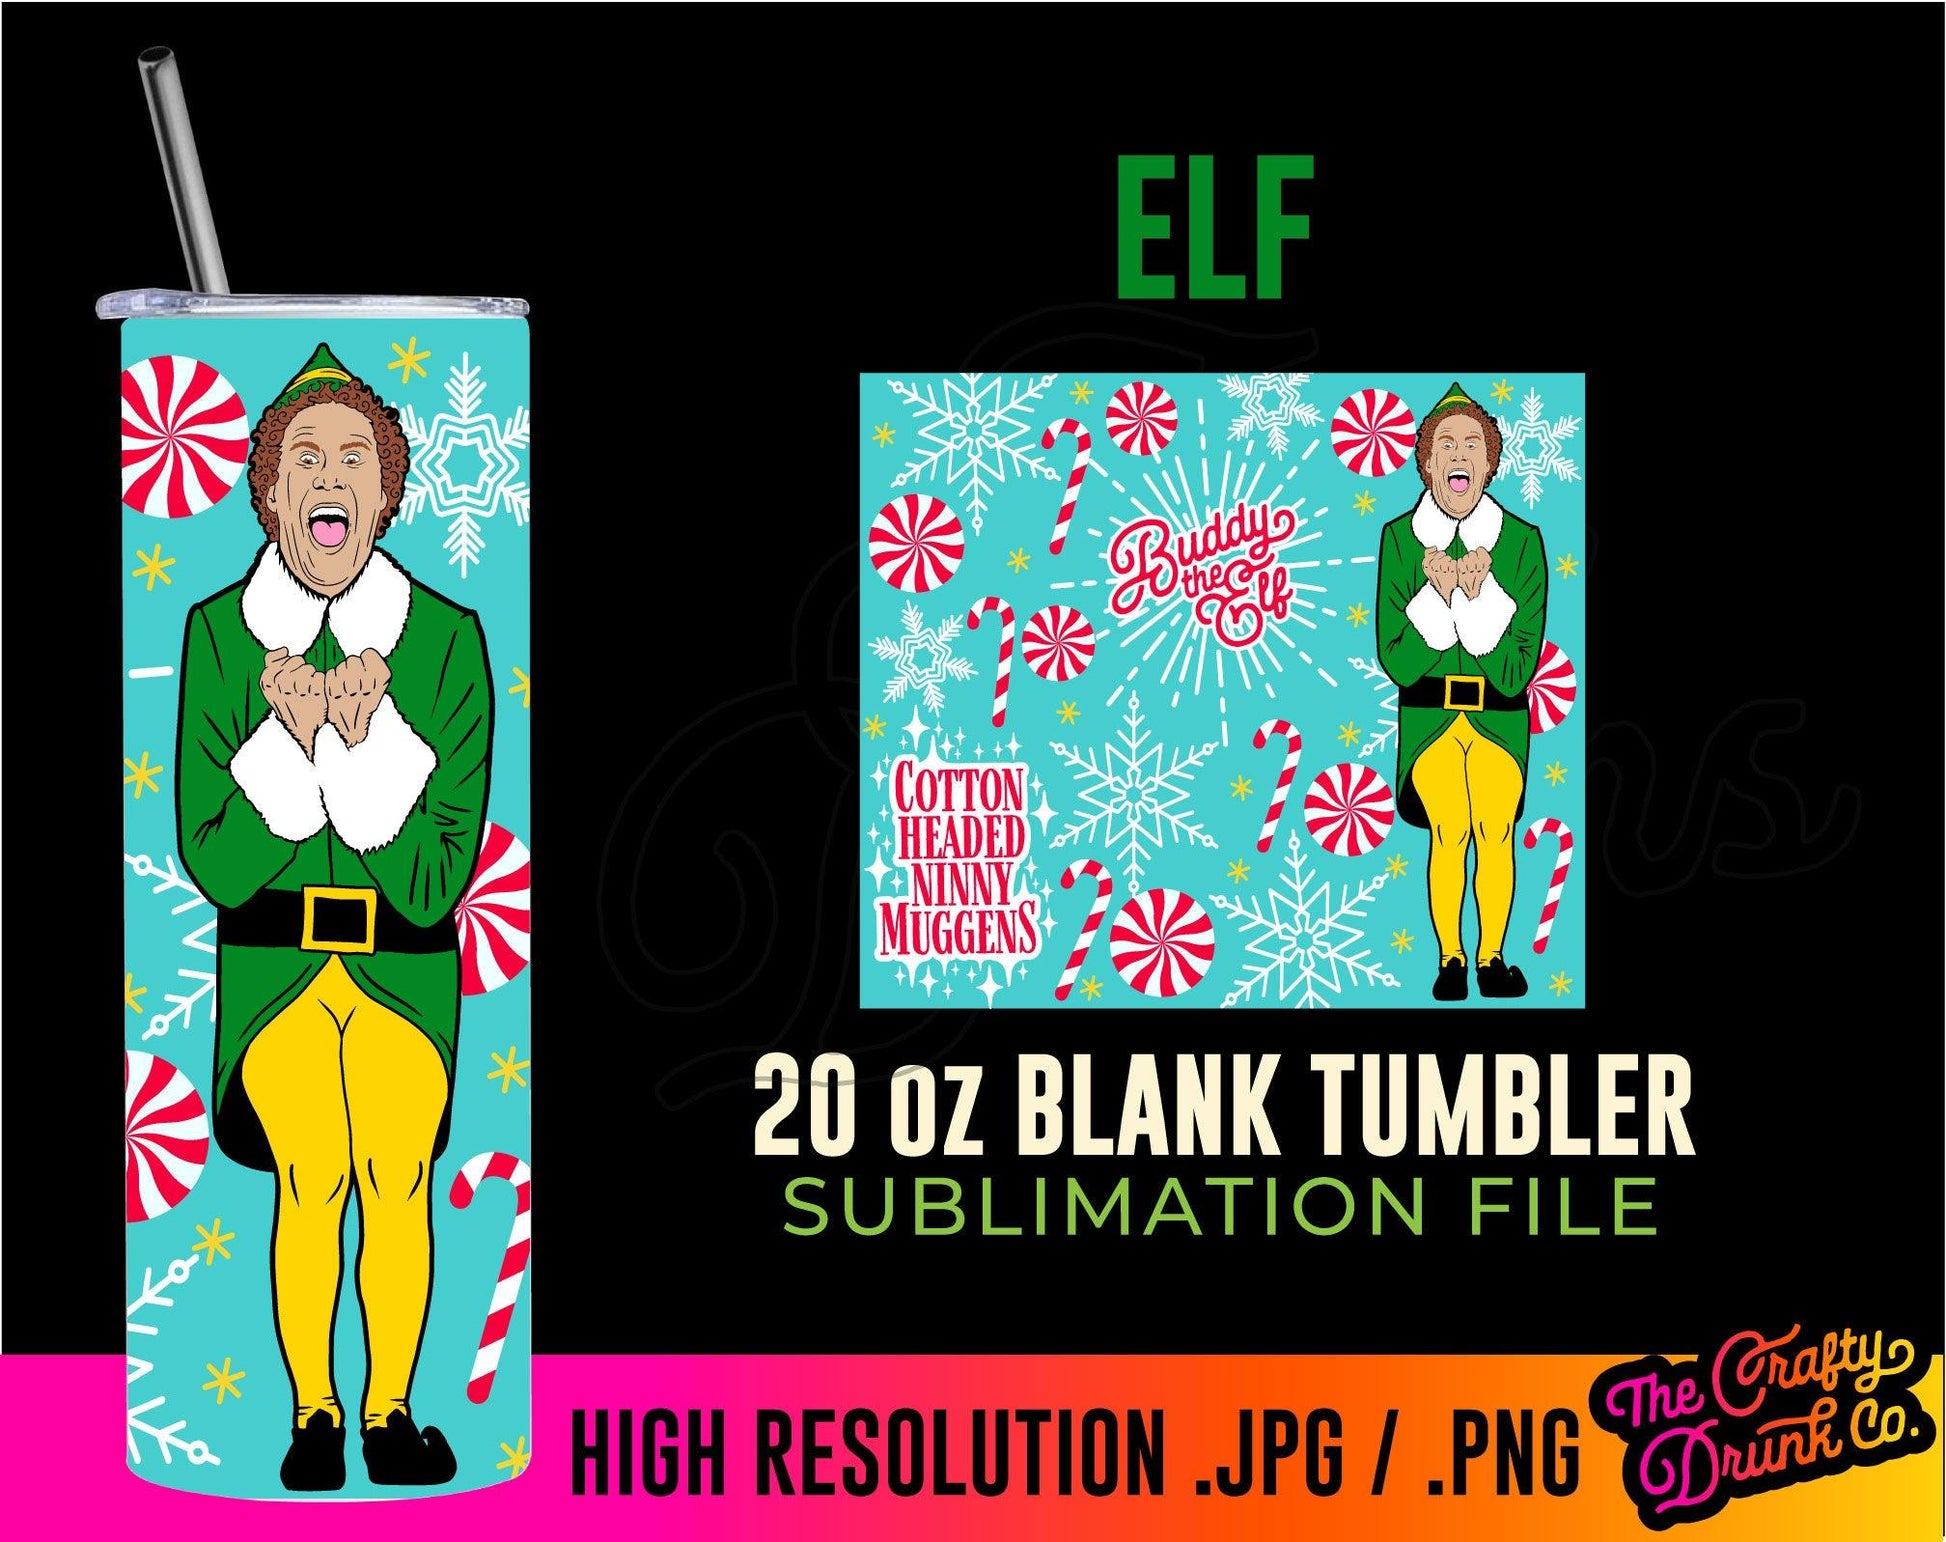 Elf 25oz Libbey Glass Can Wrap and 20oz Stainless Steel Tumbler Sublimation  .png Wrap – TheCraftyDrunkCo